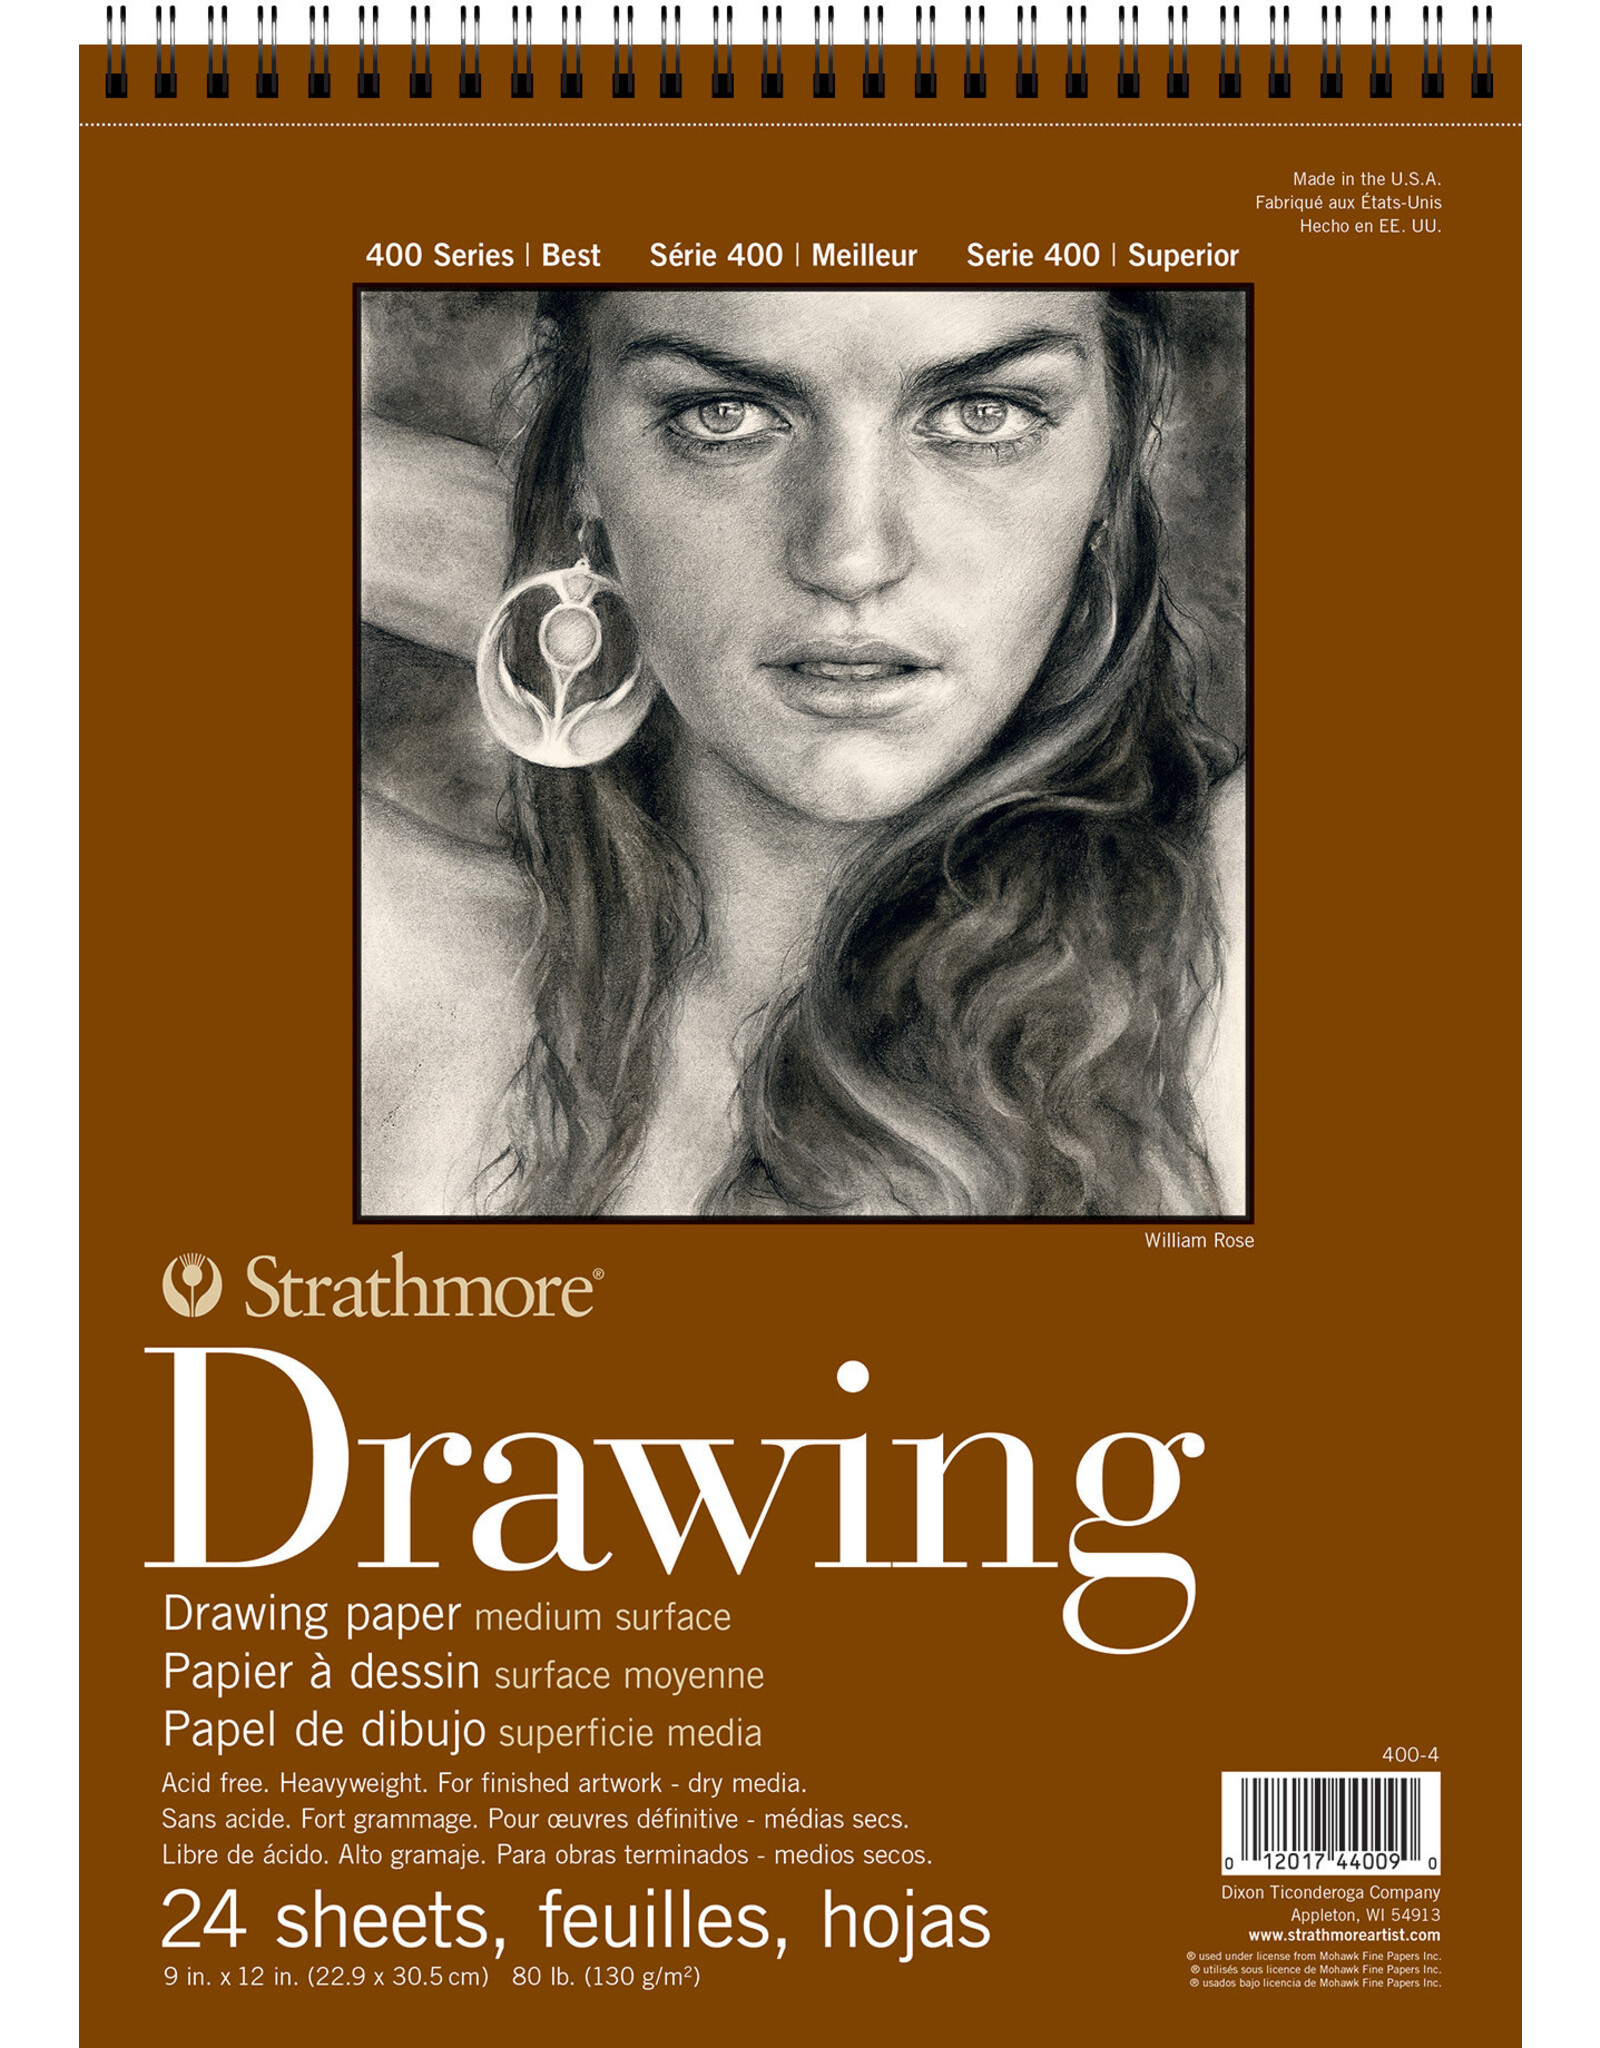 Strathmore Strathmore 400 Series Drawing Pads, 24 Sheets, 9” x 12”